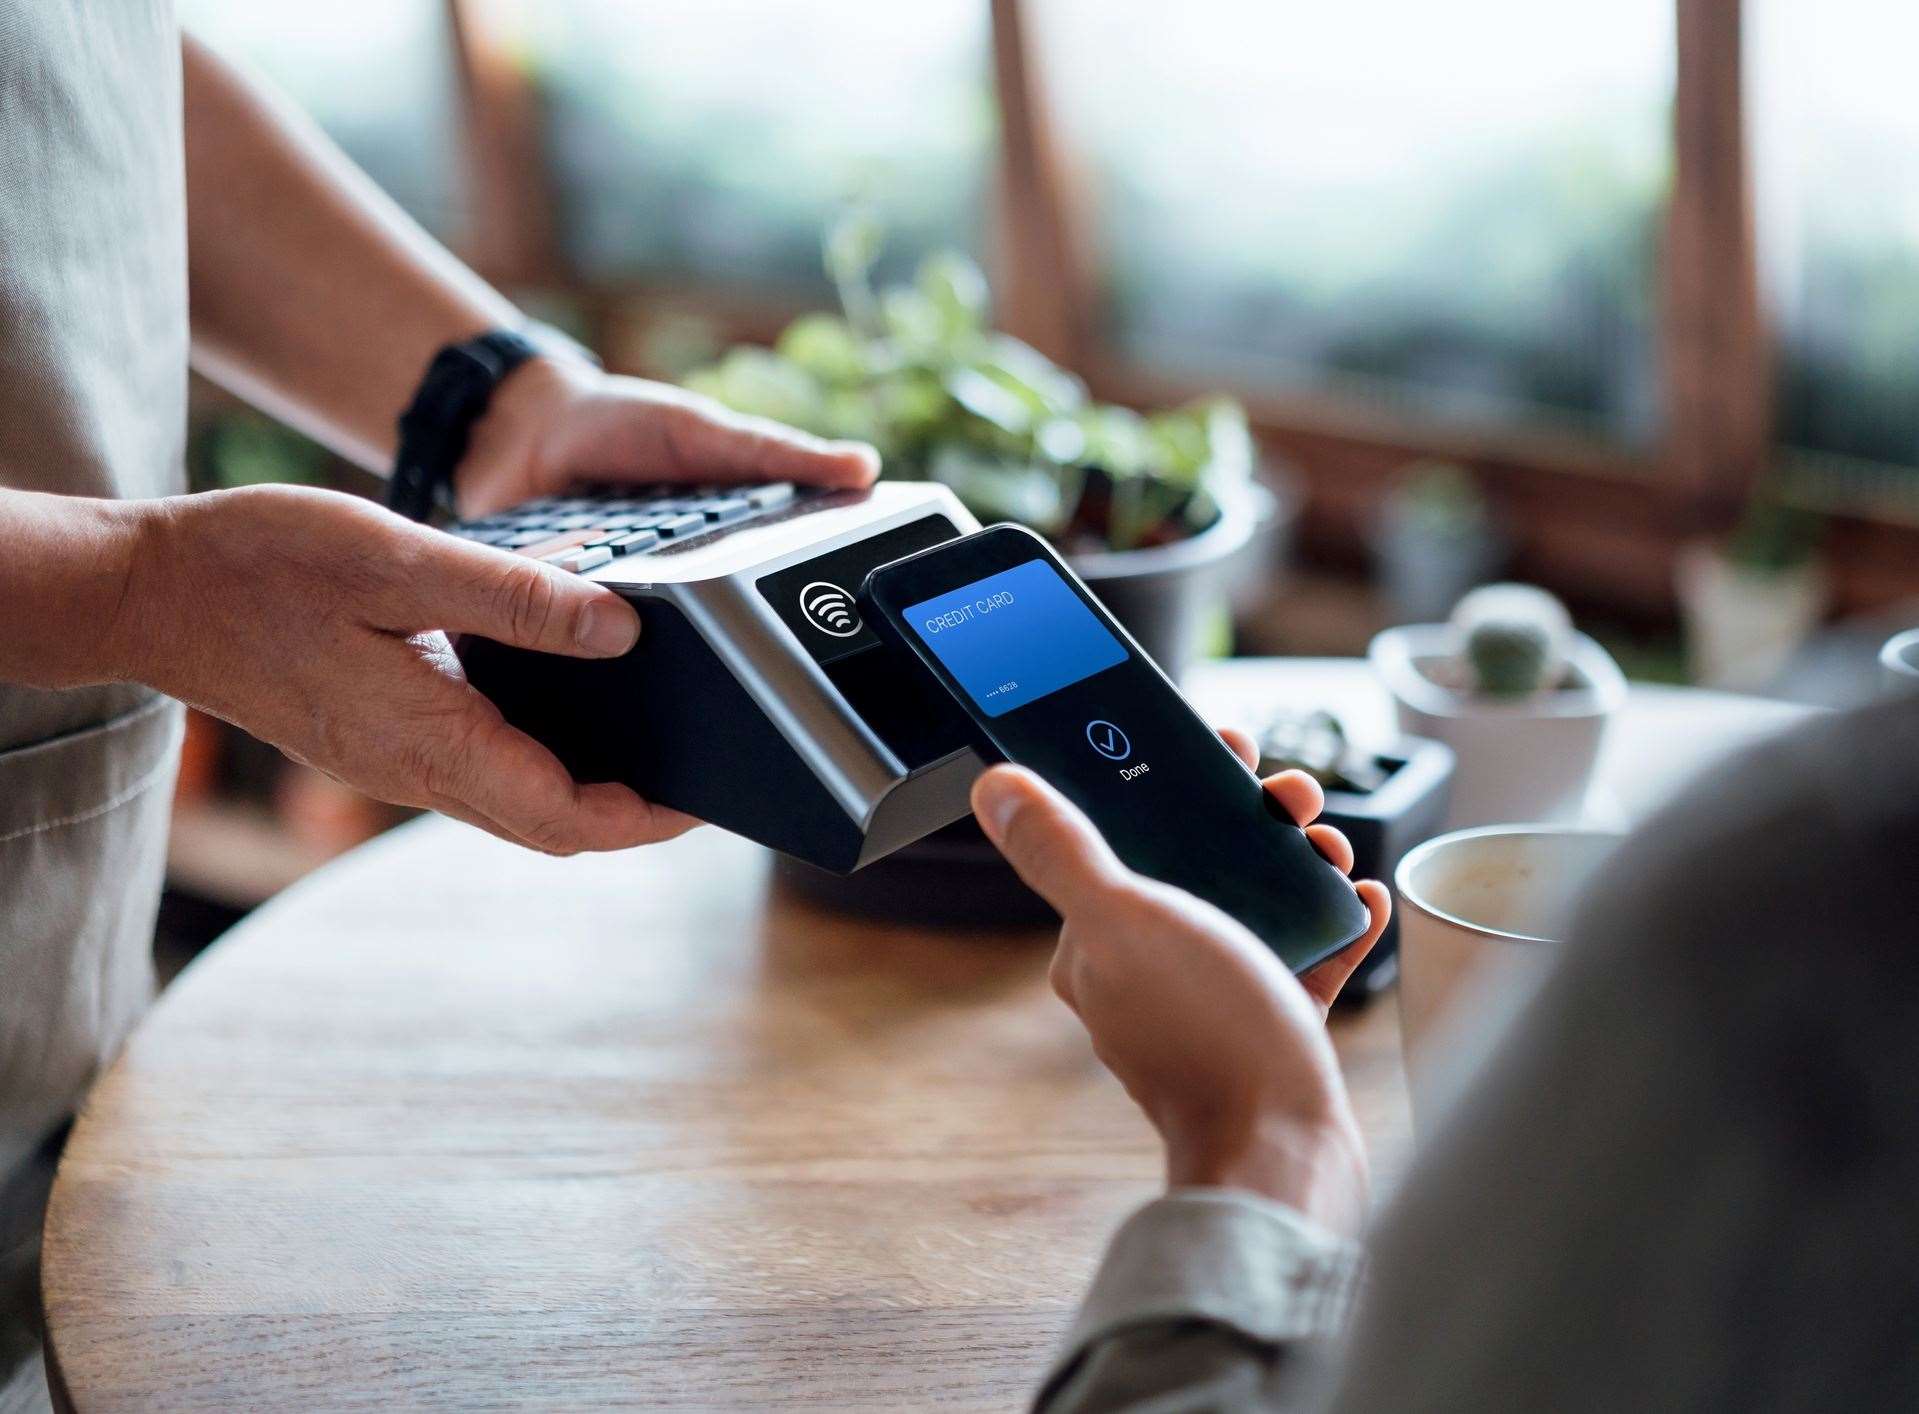 Fewer places are now accepting hard currency as we shift into an increasingly cashless society. Picture: iStock